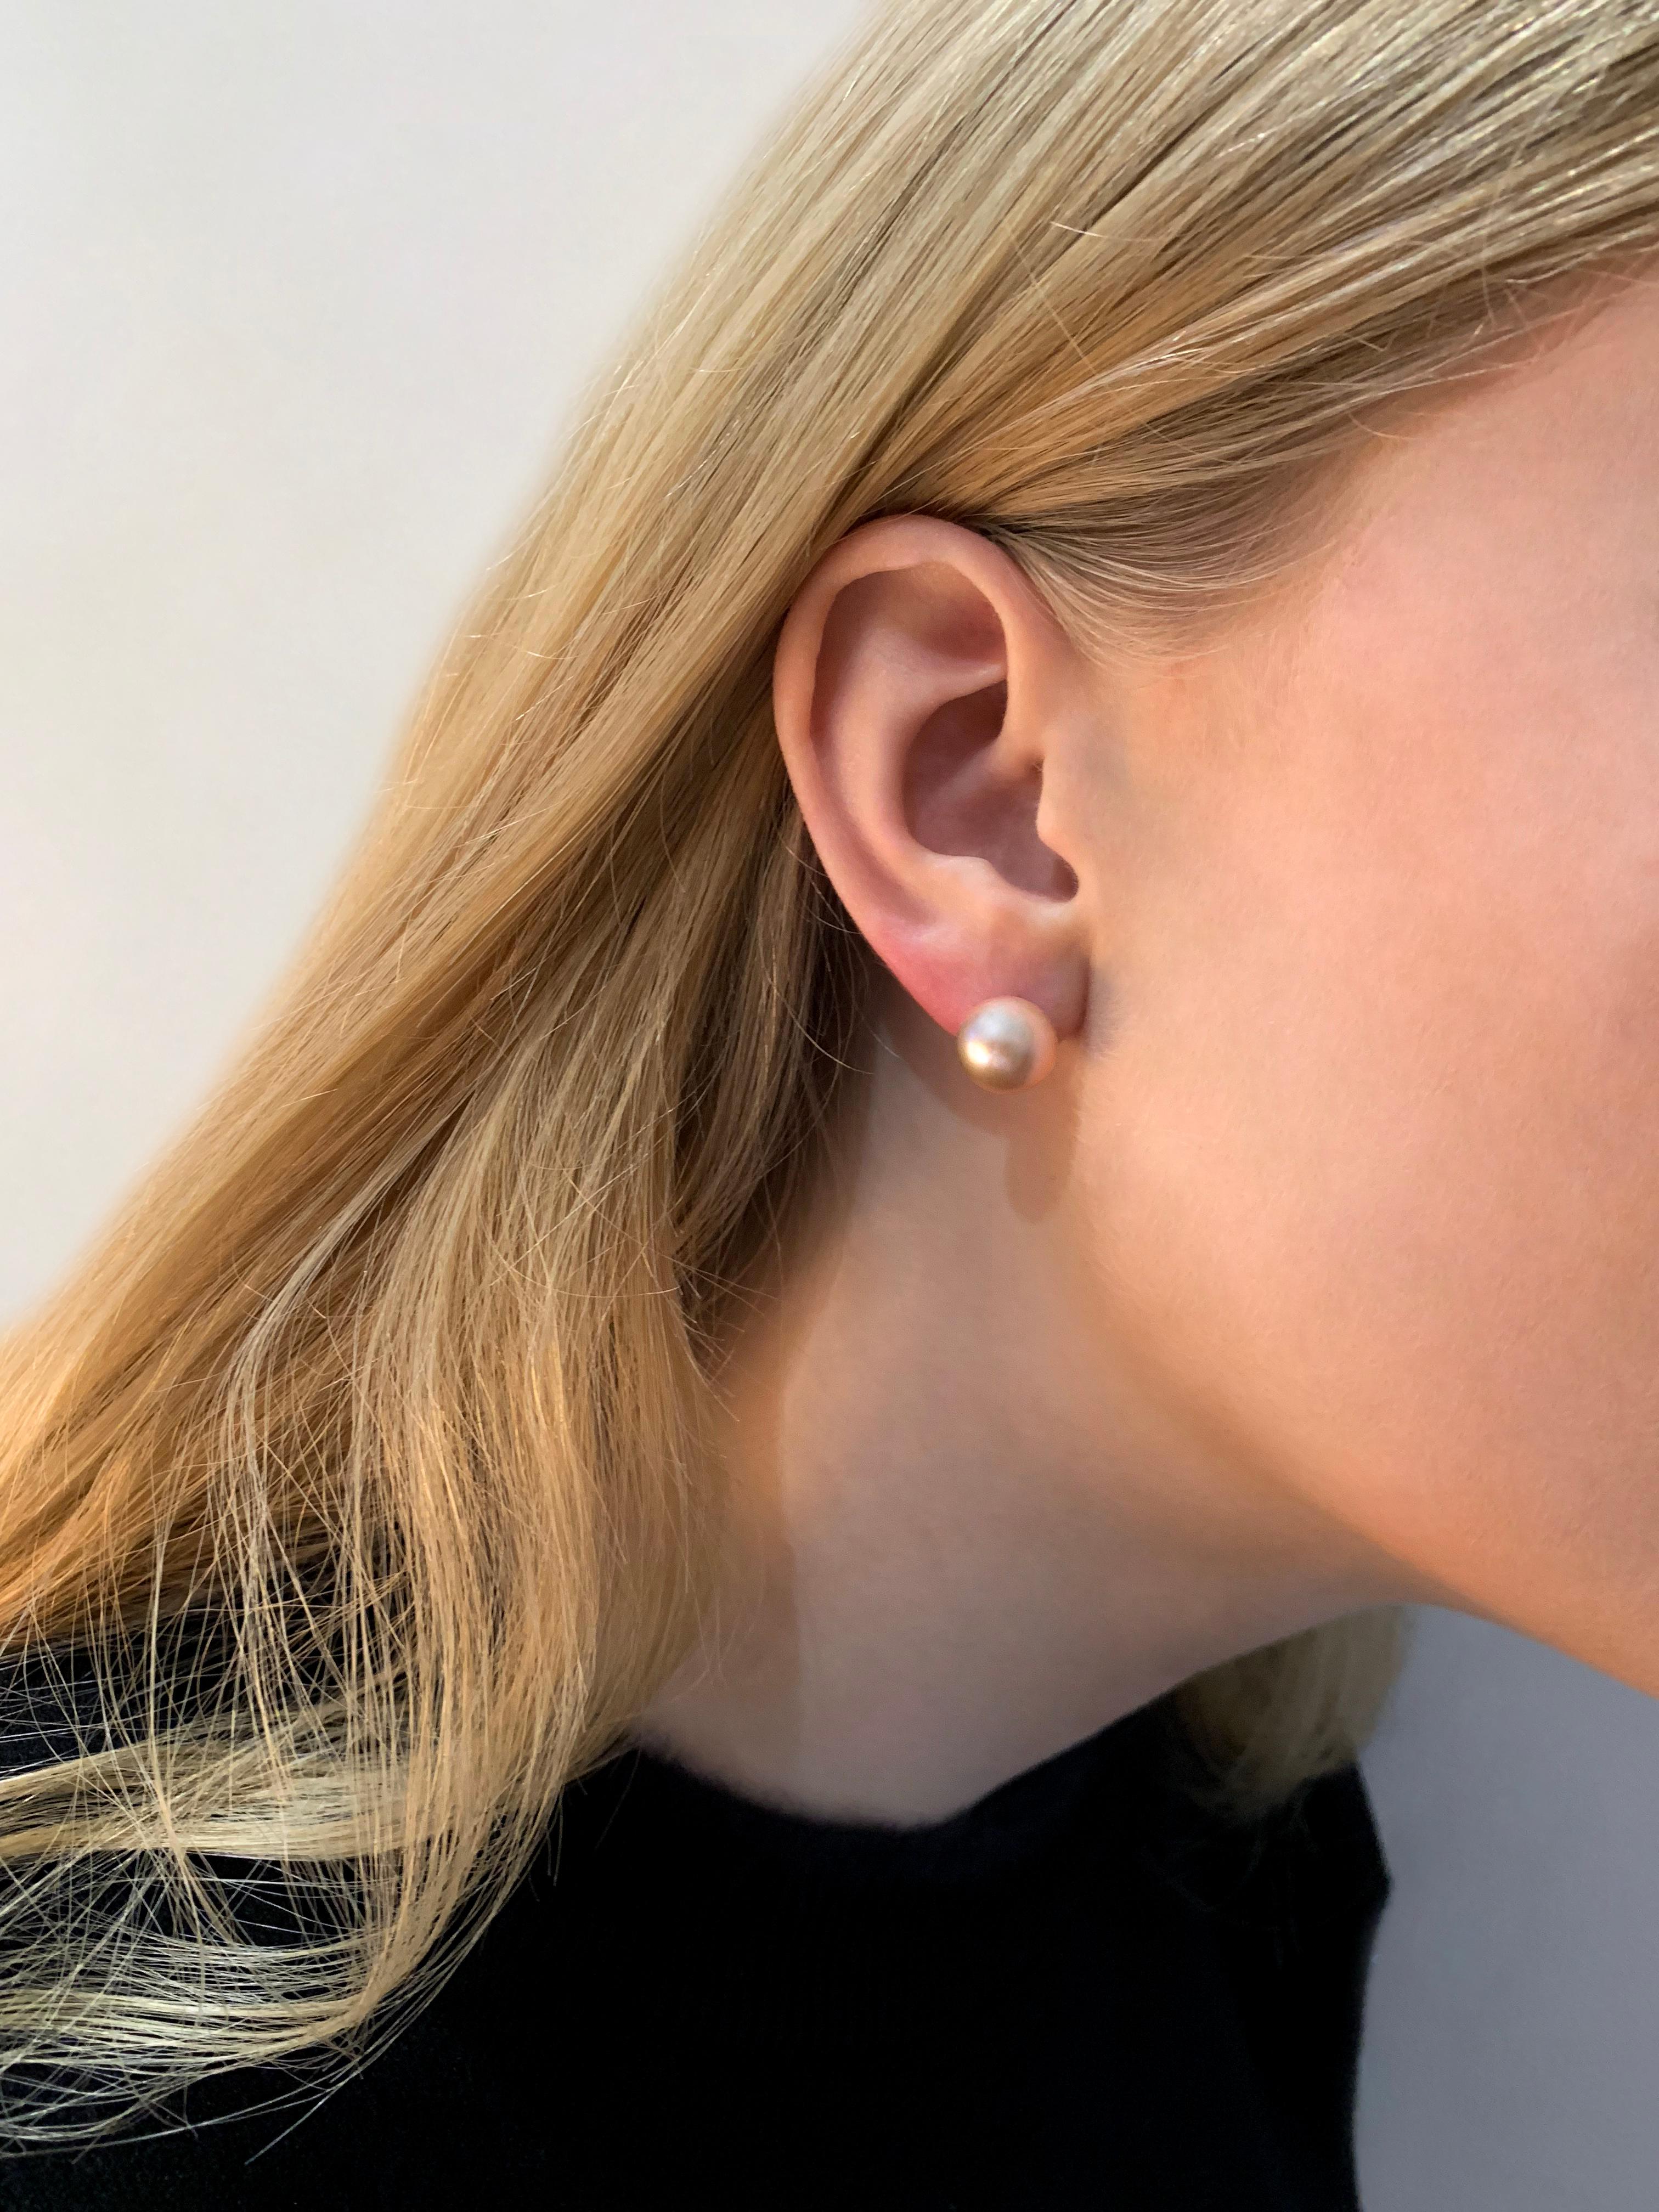 These elegant natural coloured Freshwater pearl studs from Yoko London are a jewellery box essential. The simple 18 Karat Yellow Gold setting allows the beautiful colour and lustre of the pearls to speak for themselves. Pair with any outfit to add a